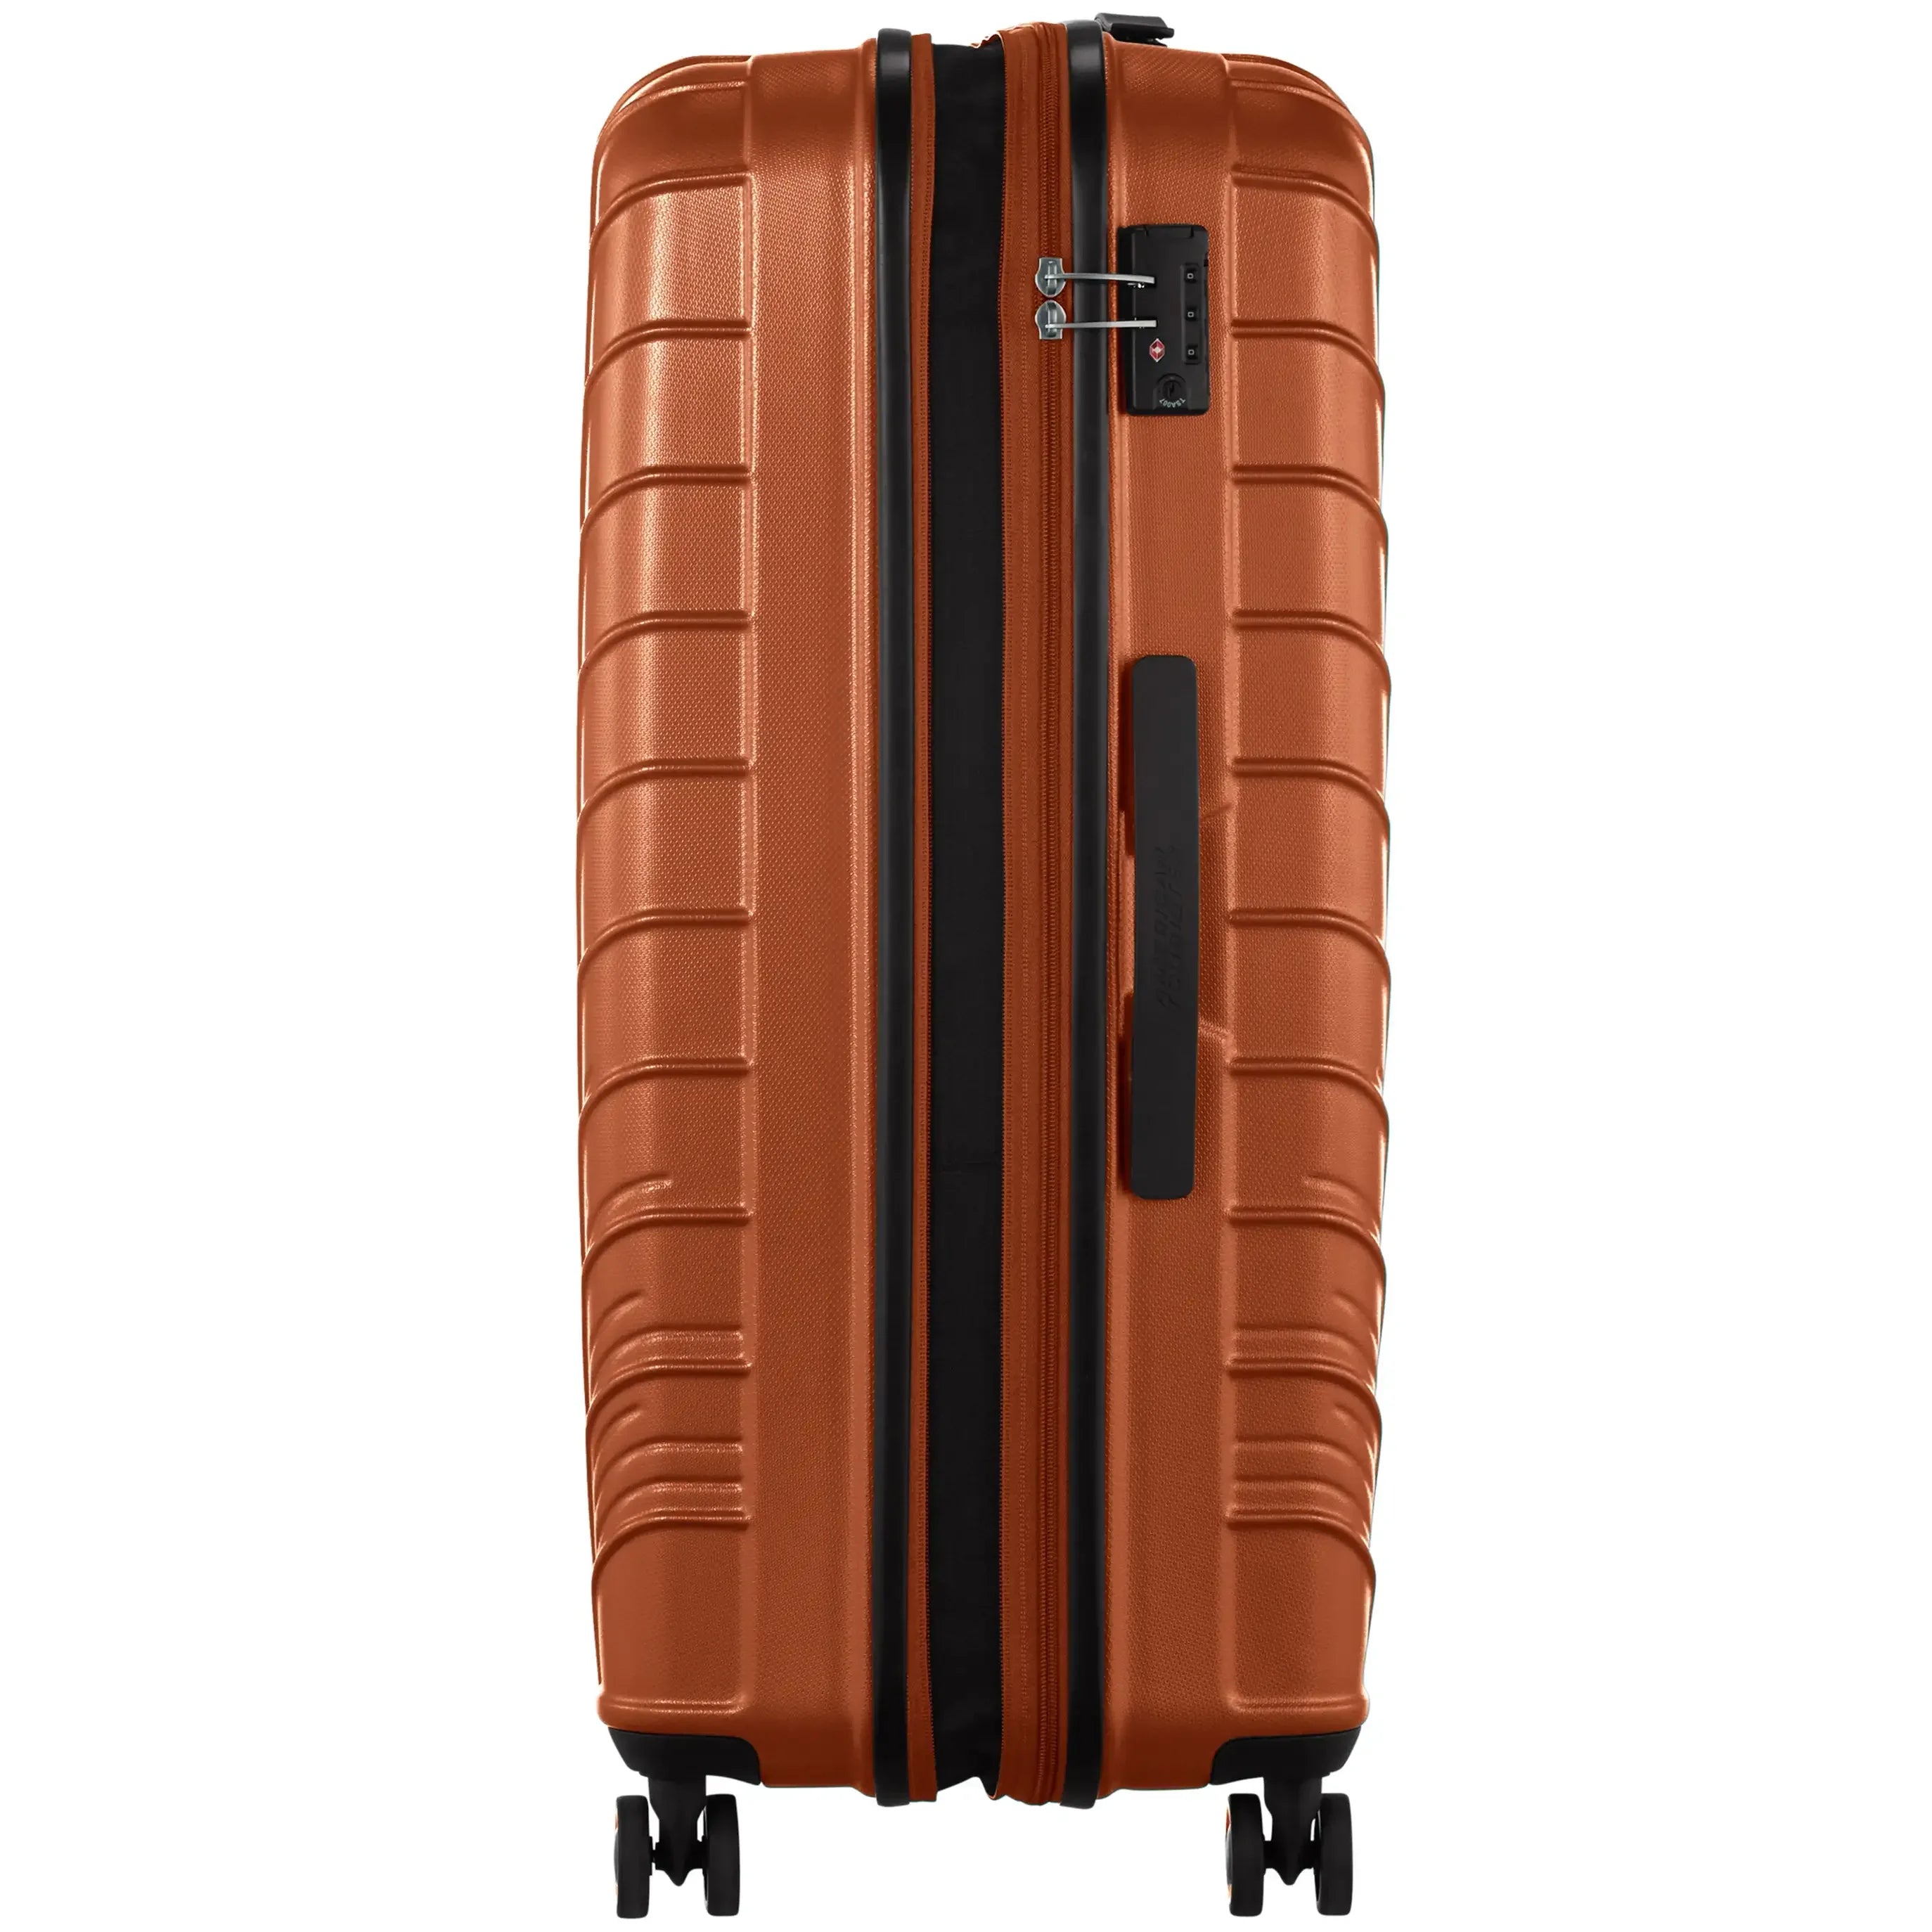 American Tourister Speedstar Spinner trolley 4 roues 78 cm - or rose